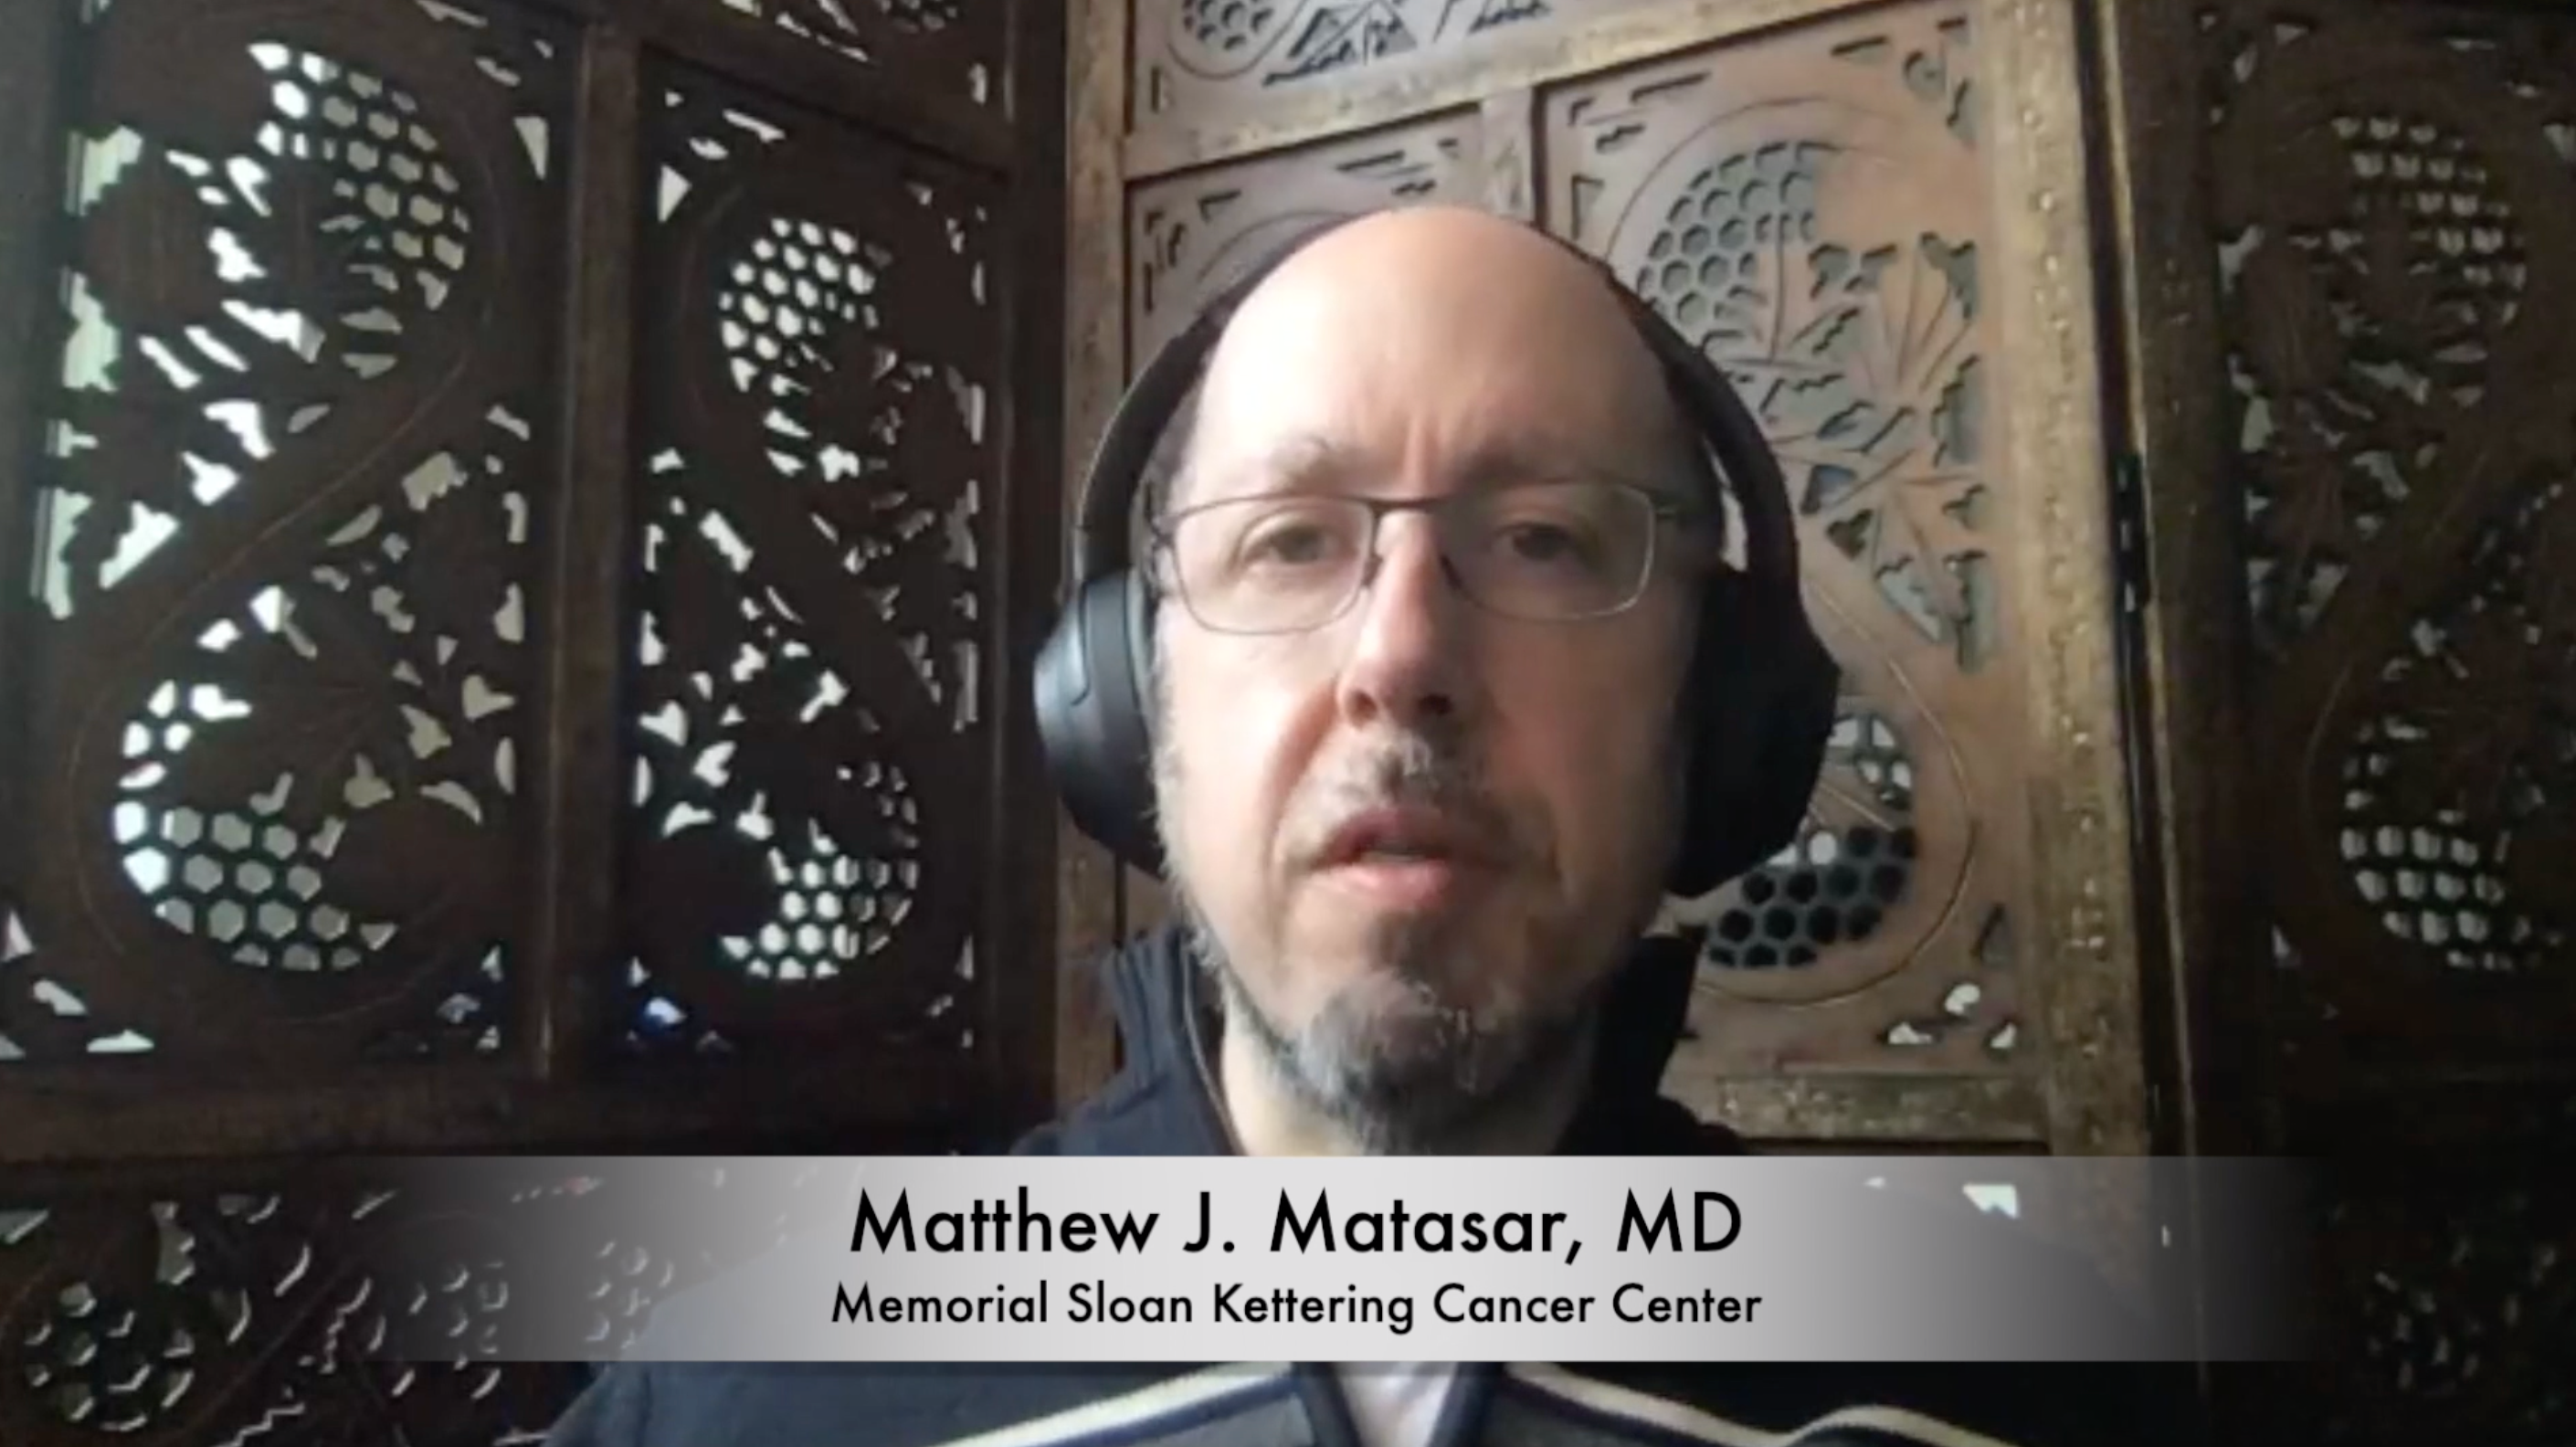 Matthew J. Matasar, MD, on the Clinical Implications of the Phase 3 CHRONOS-3 Study